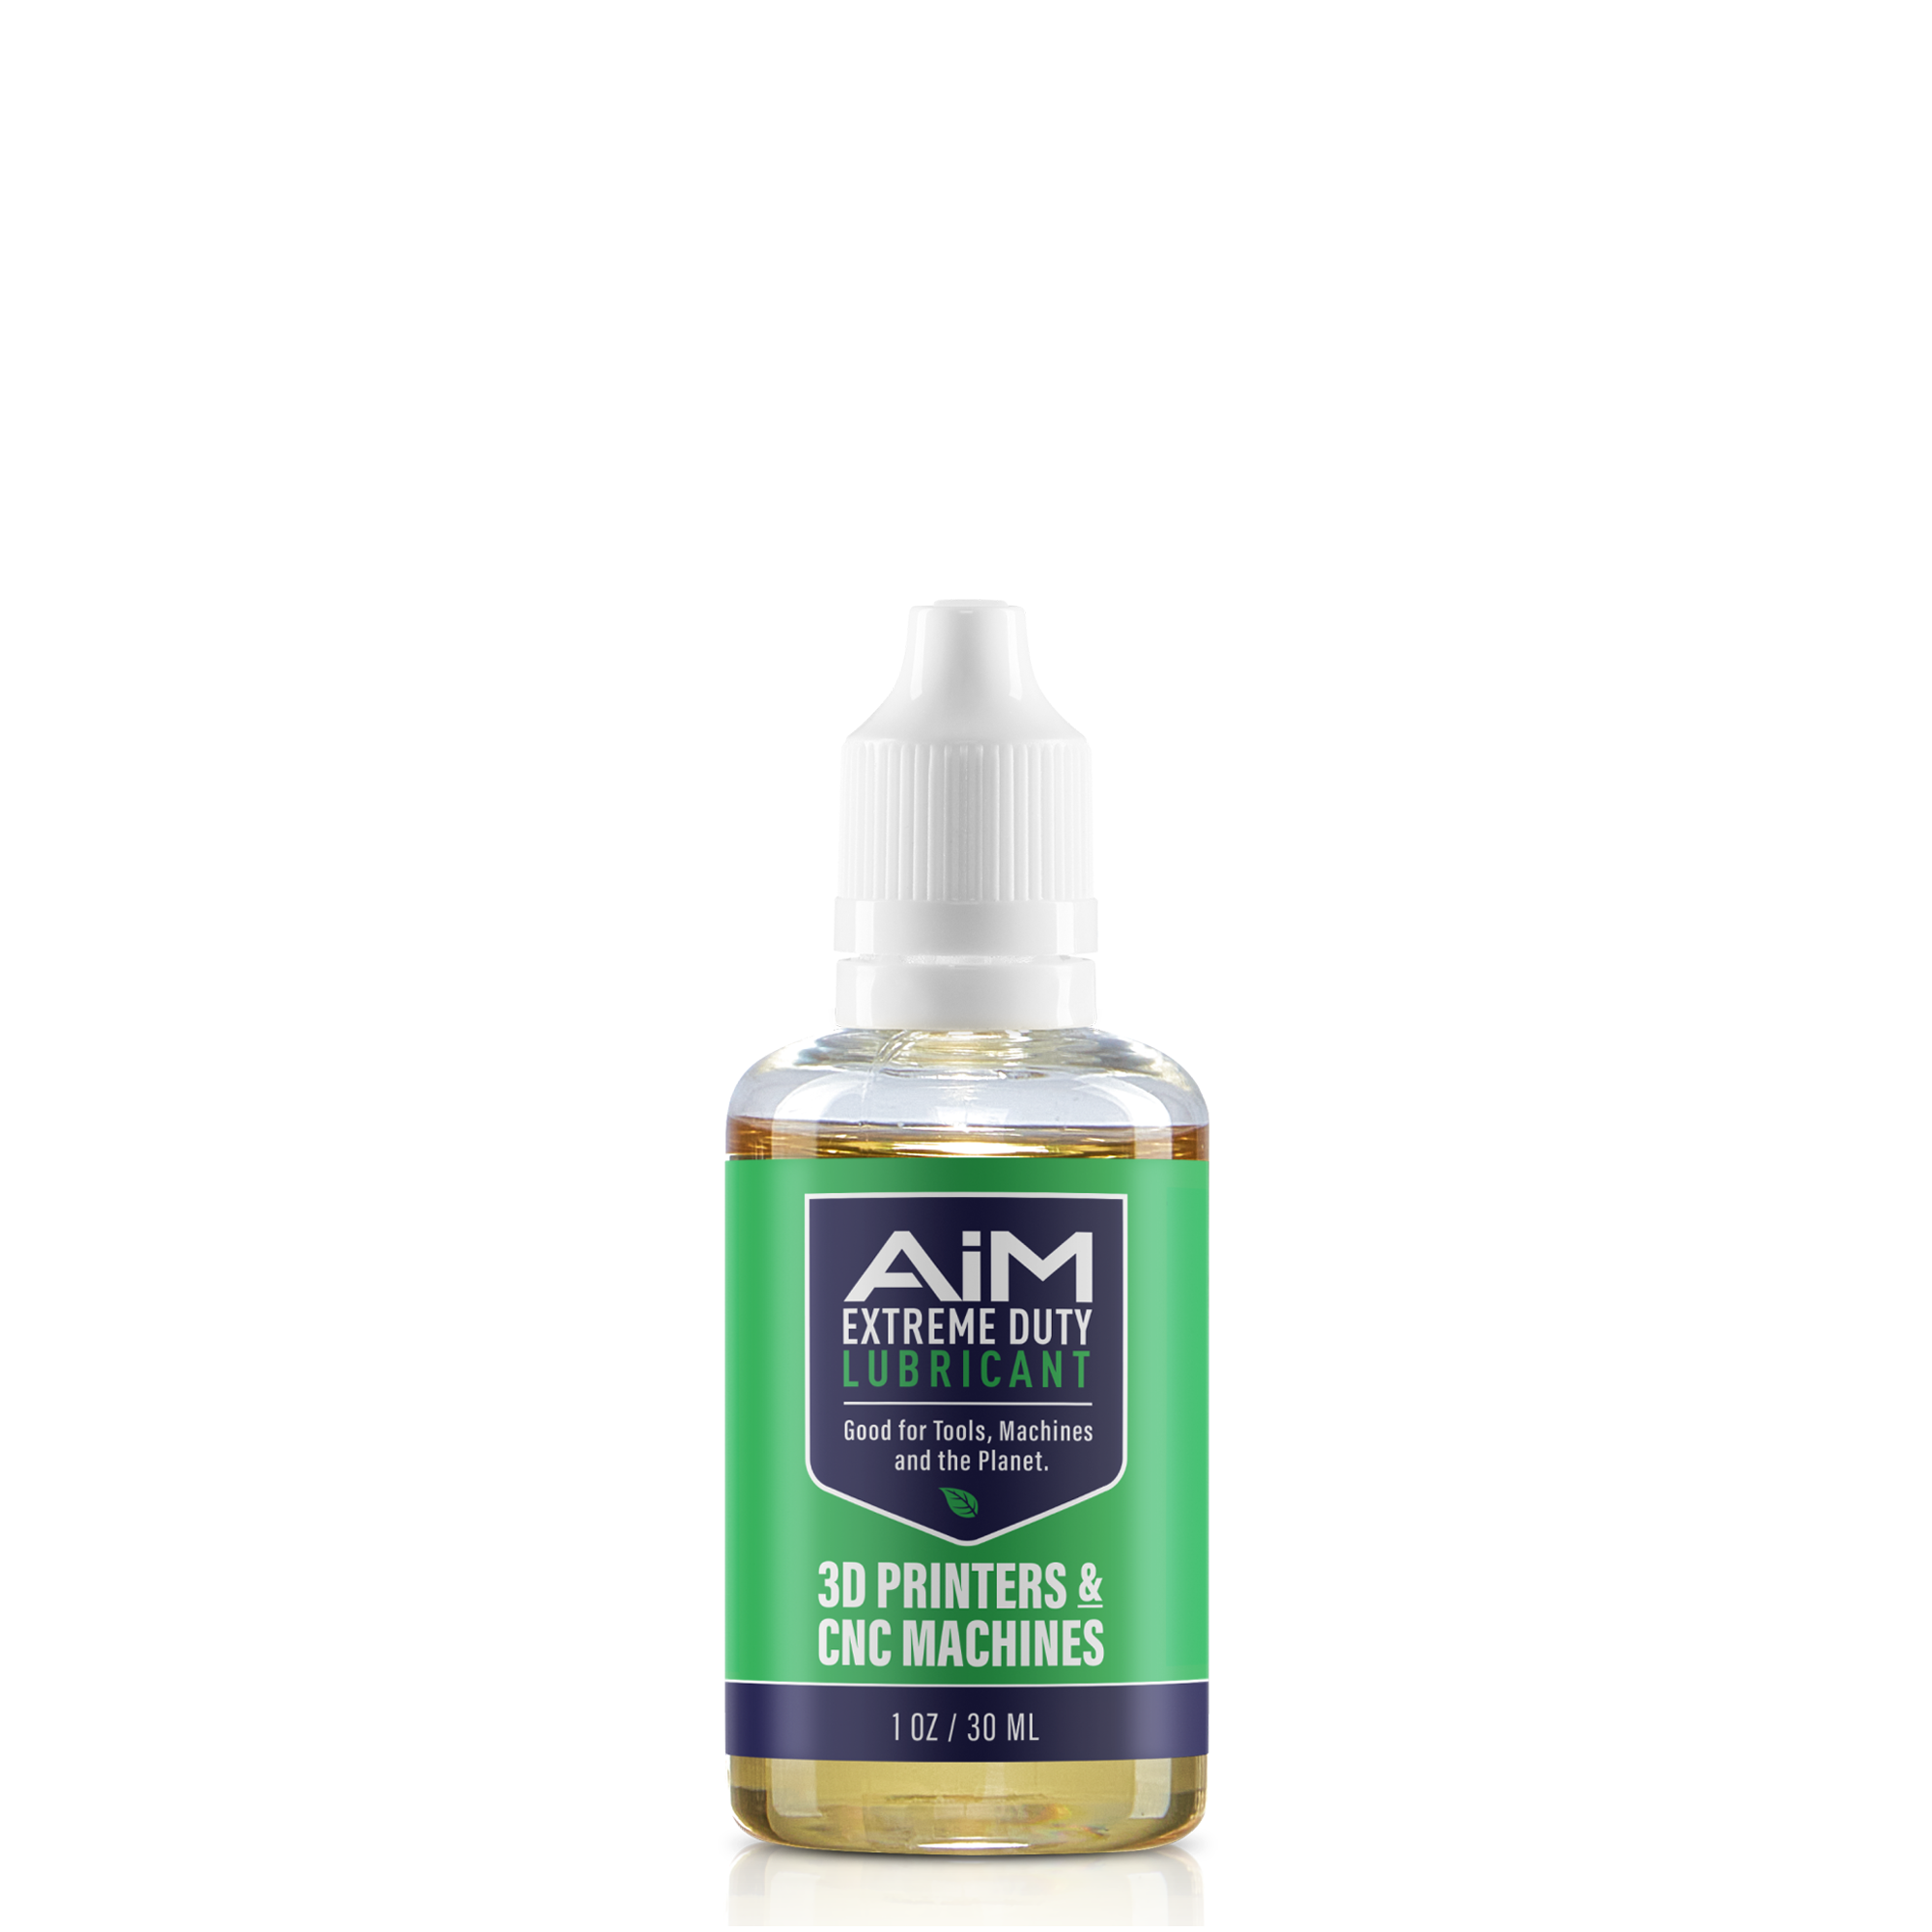 AiM Extreme Duty Lubricant | 3D Printer and CNC Machine Lubricant Oil | Specialty | 1oz precision tip